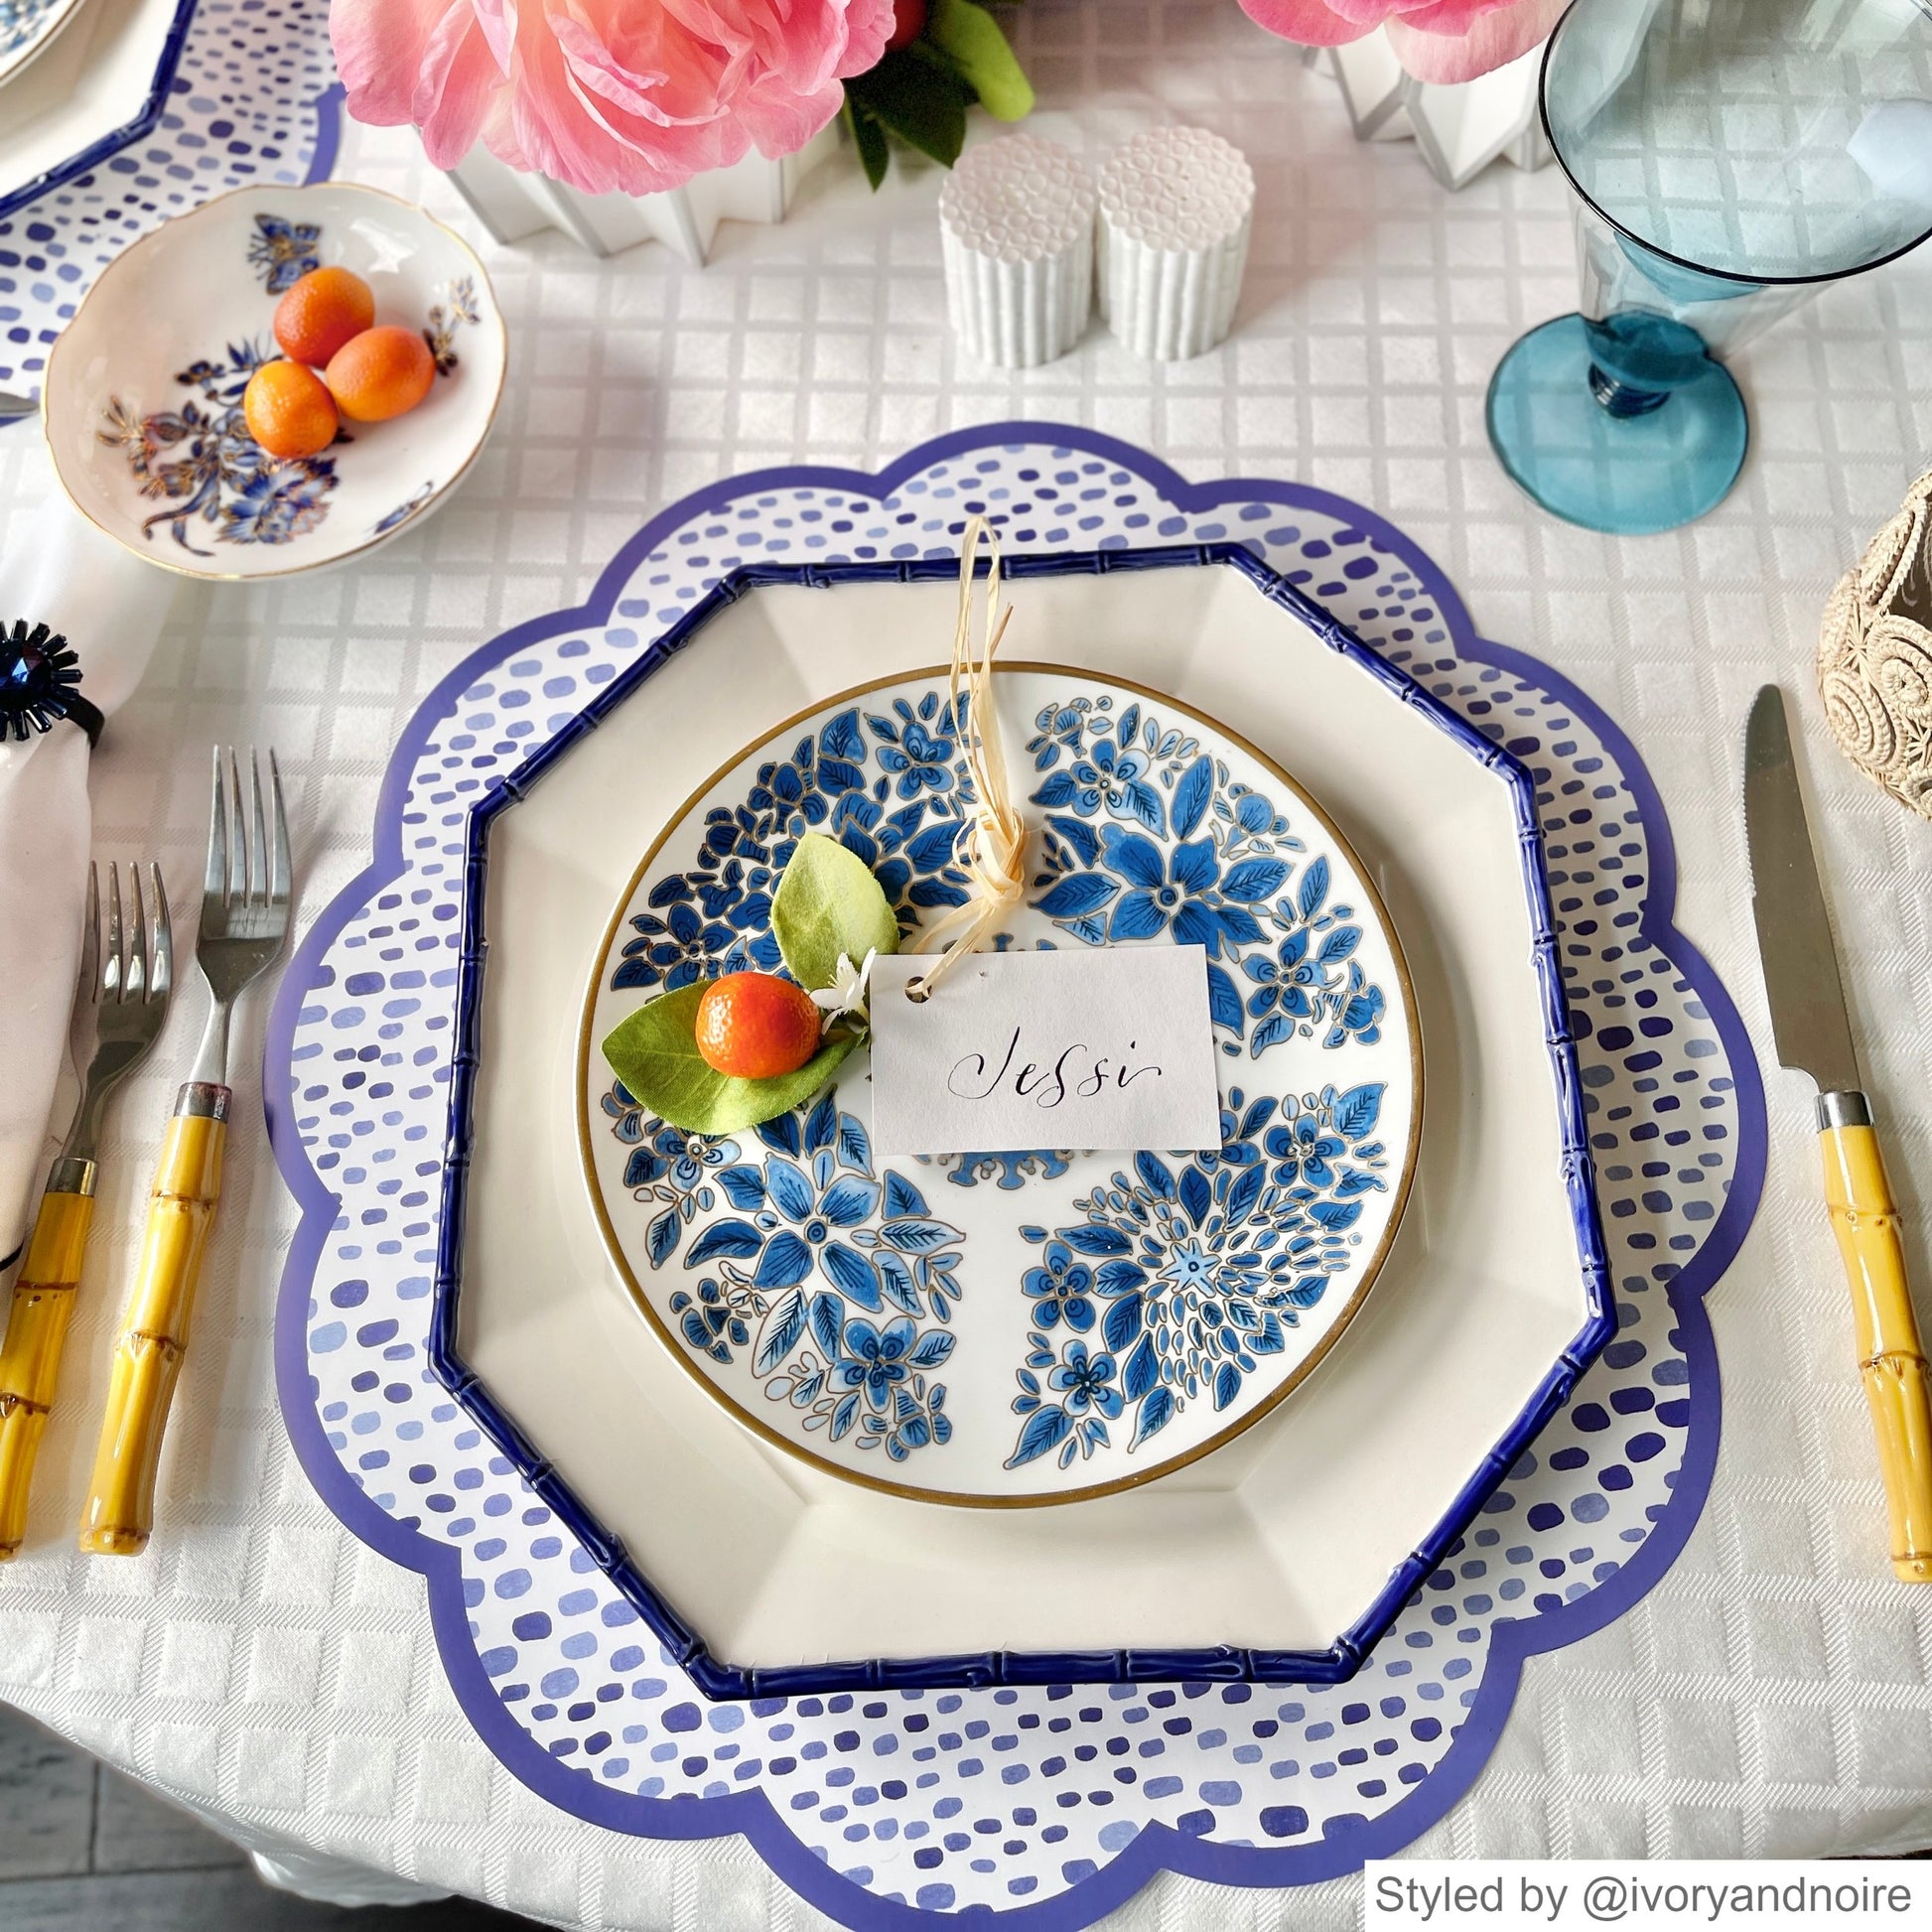 Blue and white dot patterned paper placemat layered with a blue and white hexagonal dish on a white tablecloth